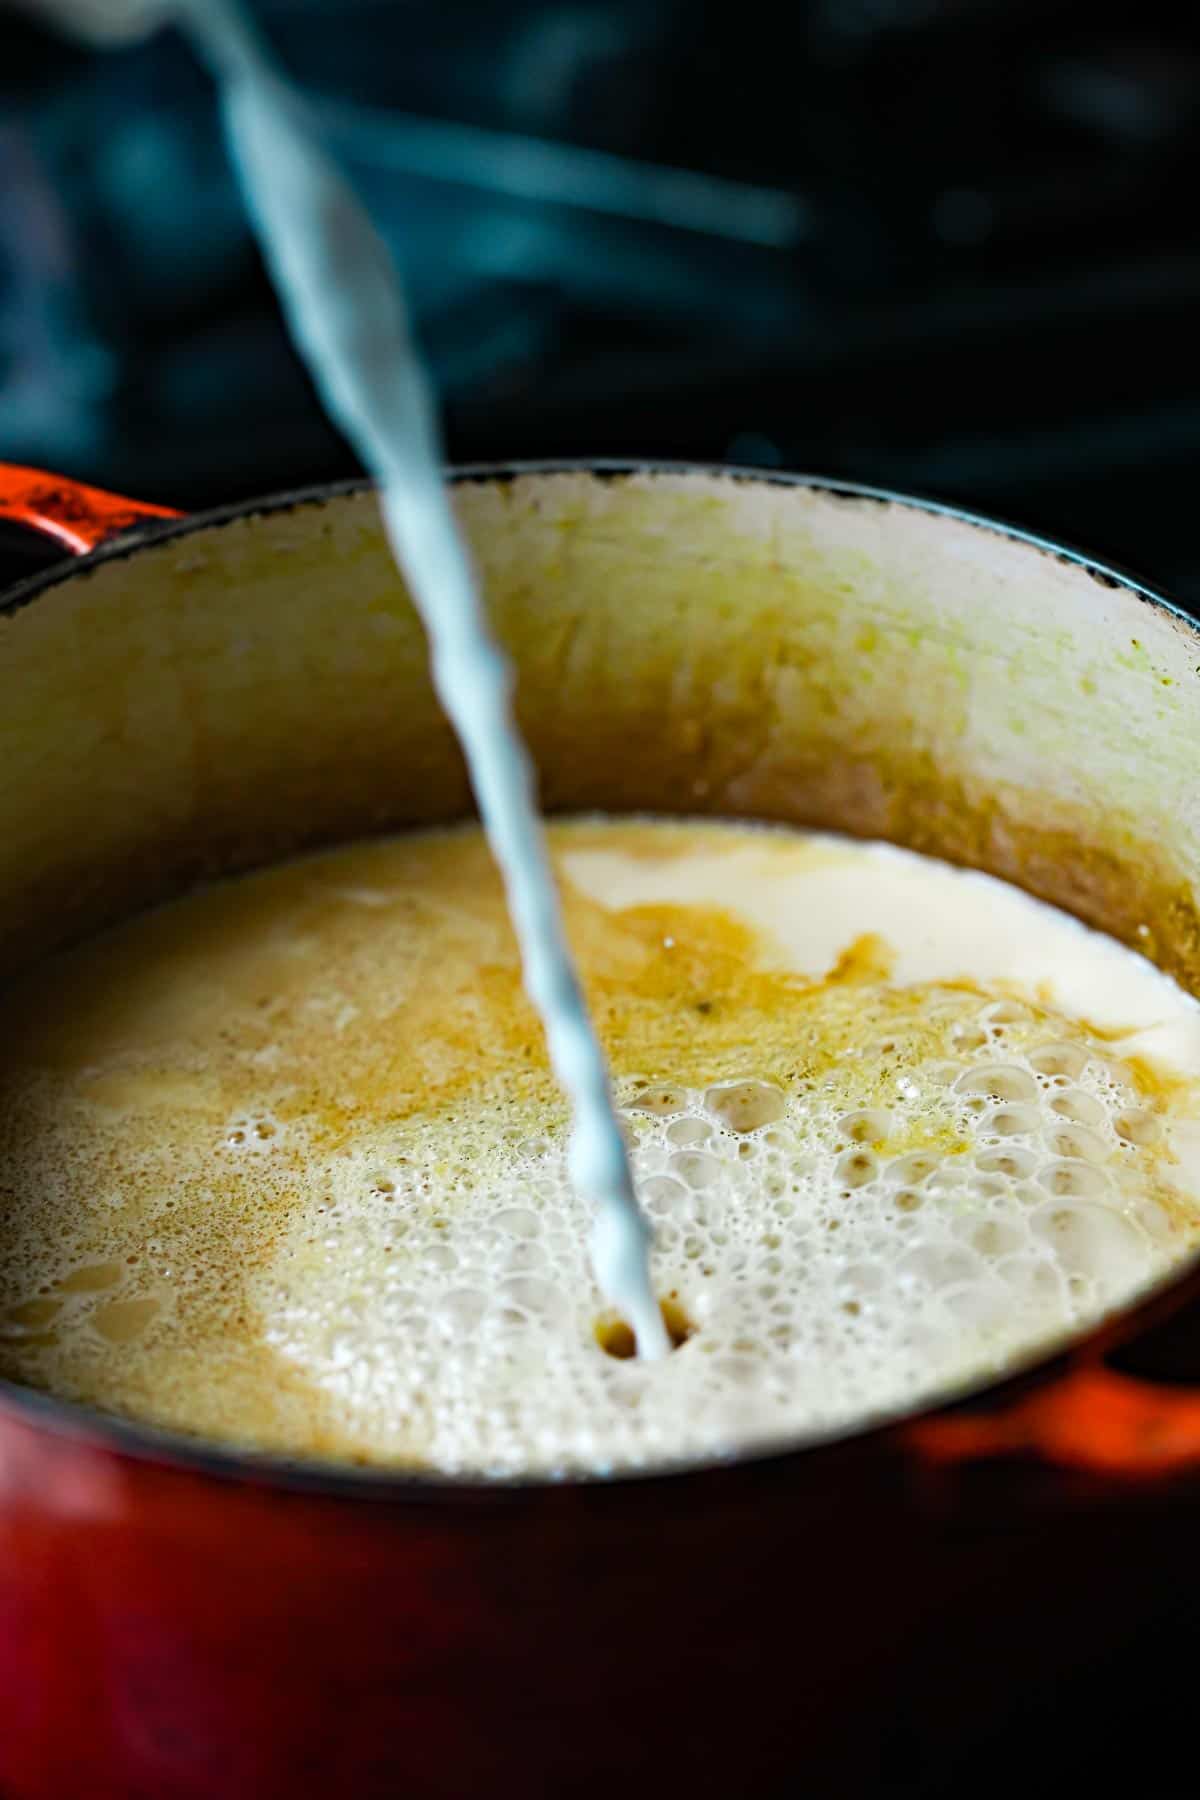 A pot with tapioca slurry being poured into it.